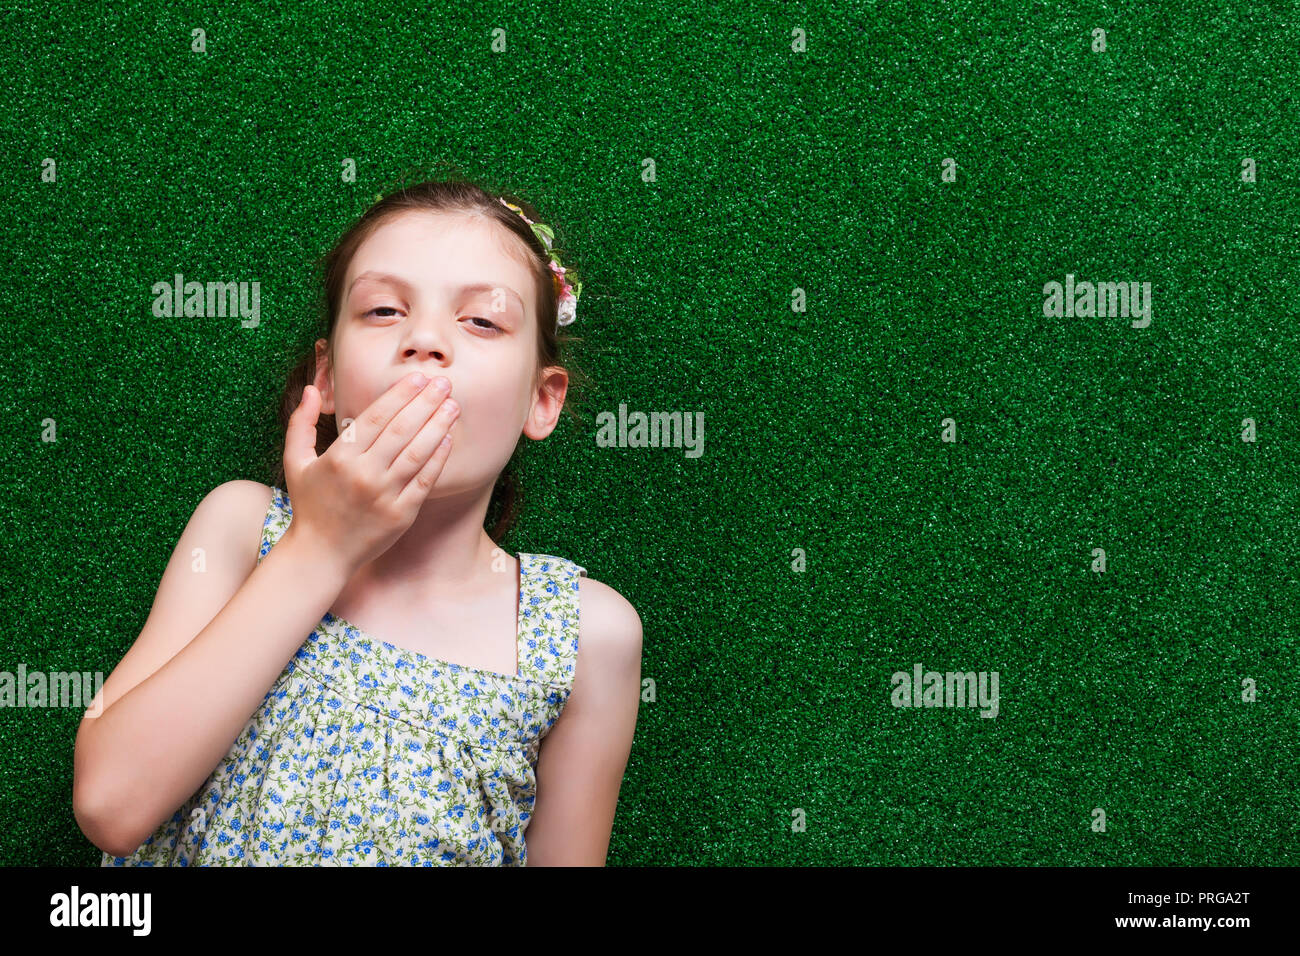 Little Girl Is Lying On Artificial Grass She Is Tired And Needs To